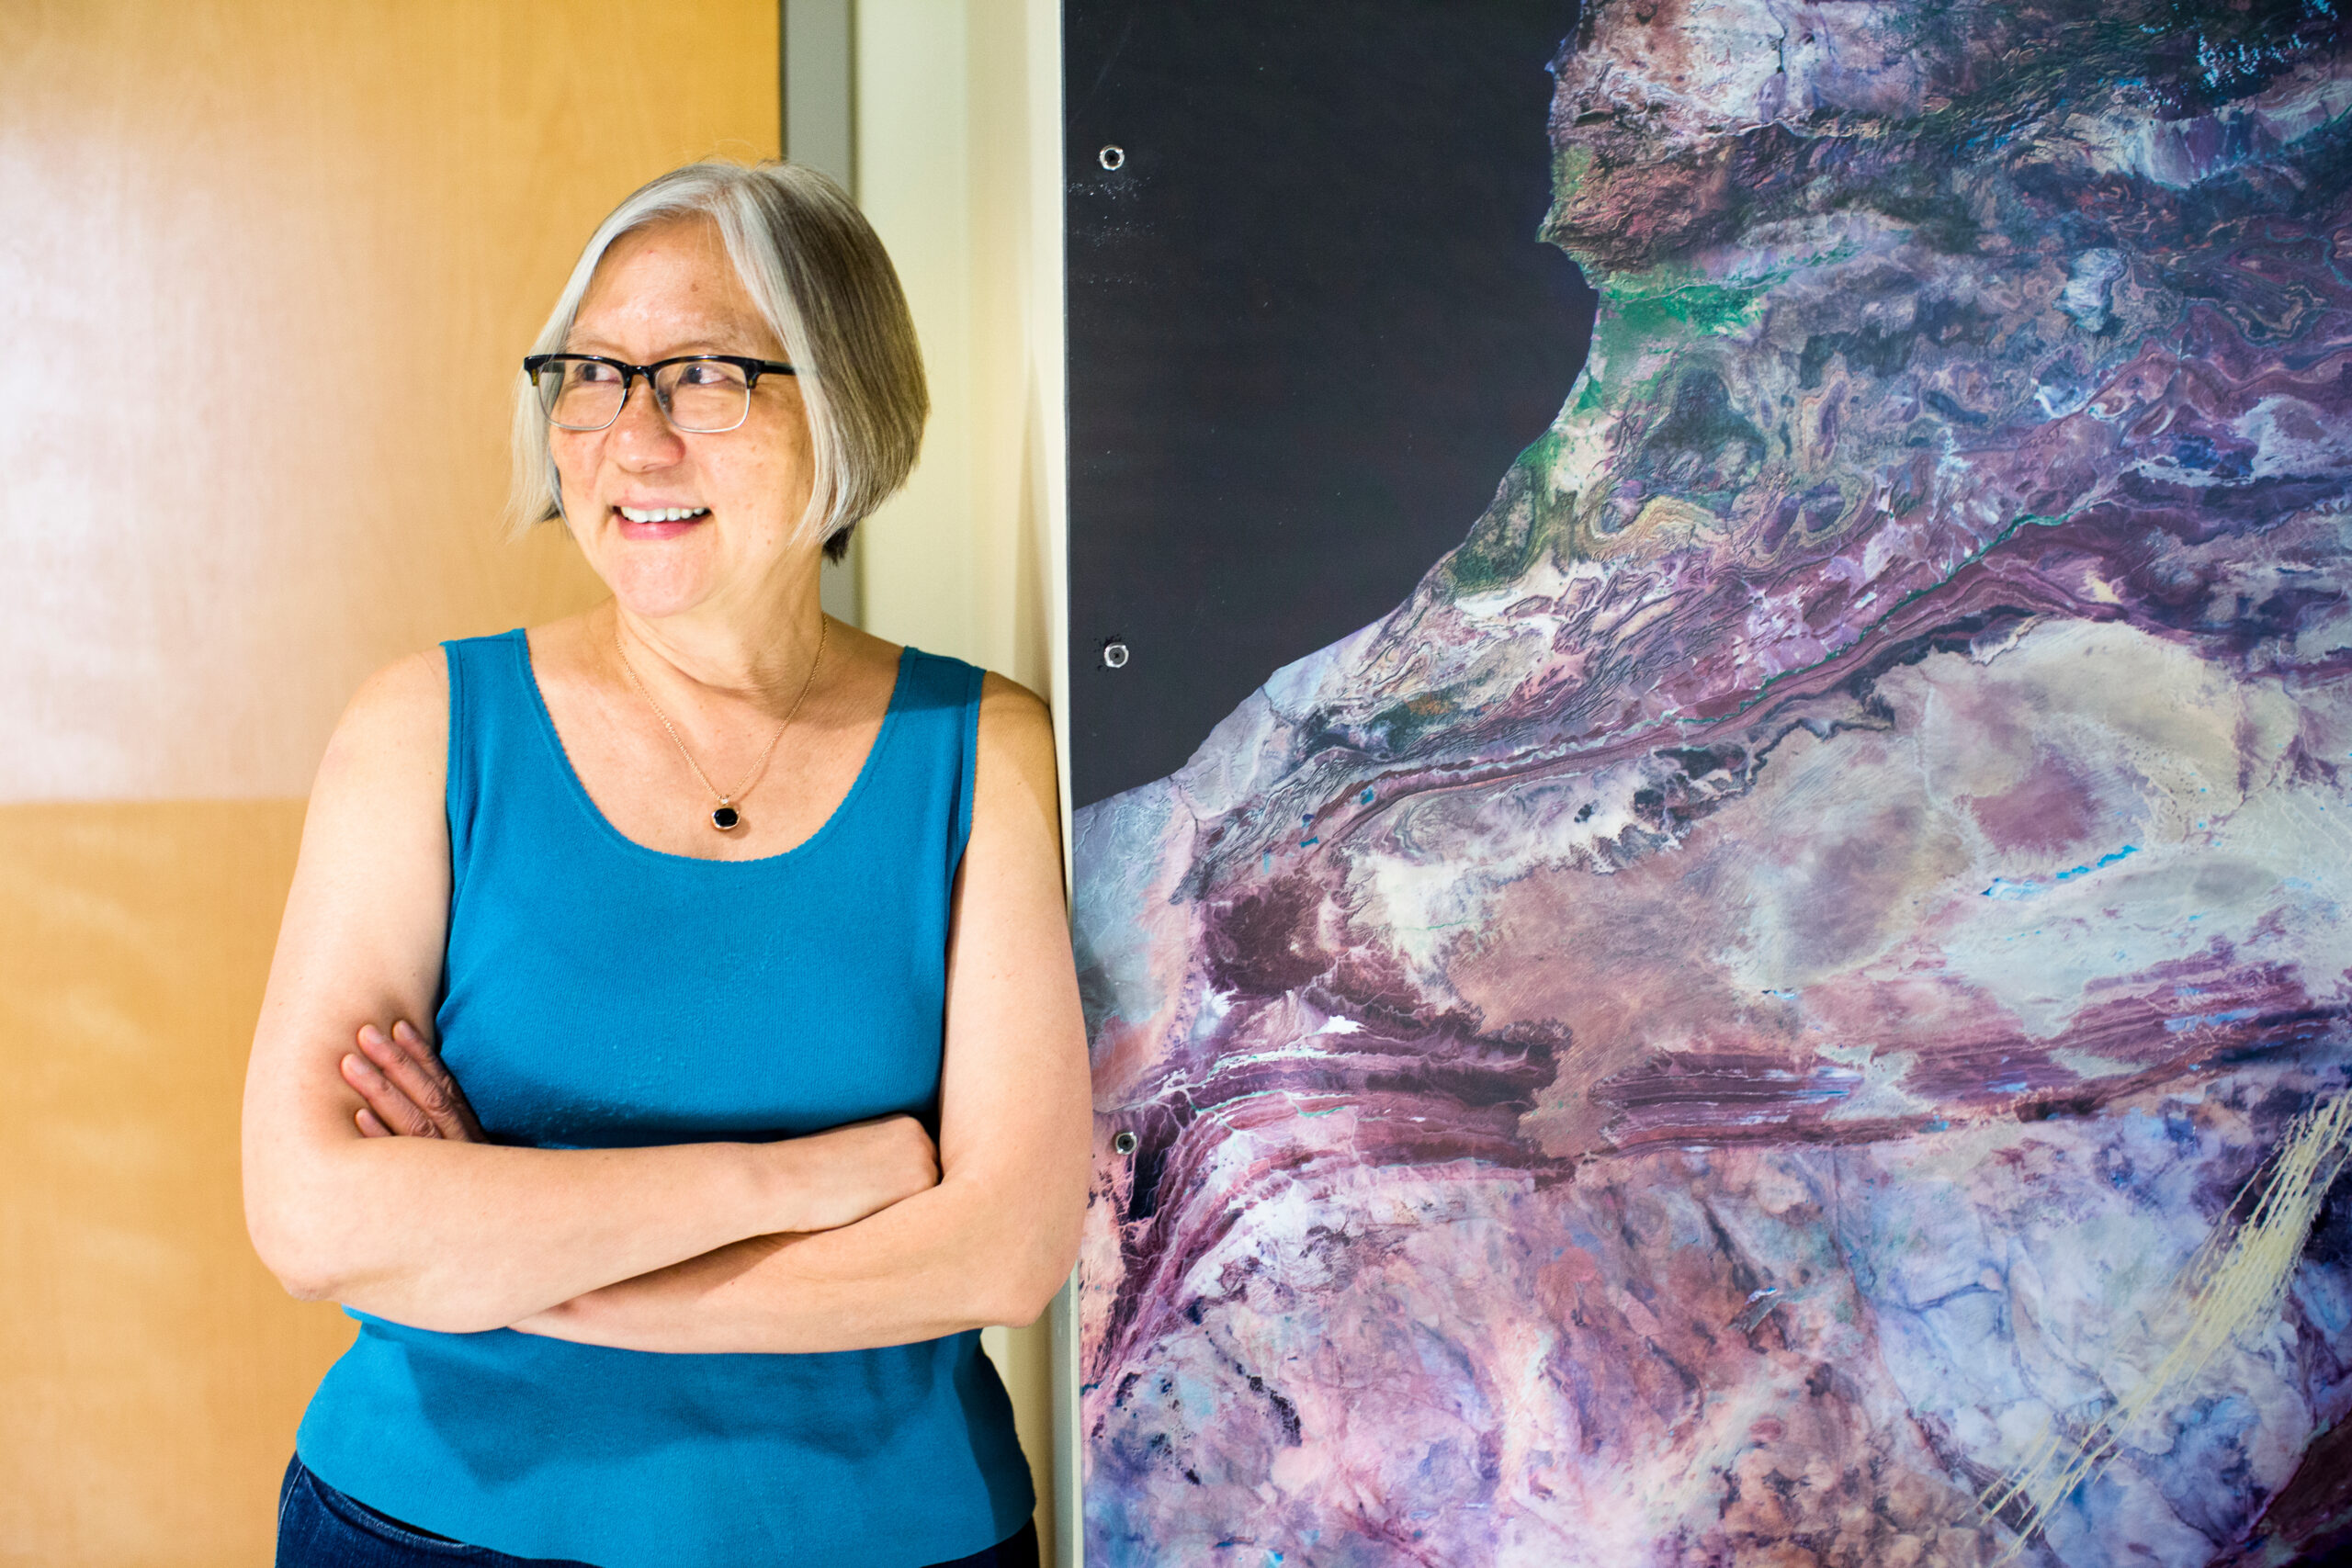 A women wearing a sleeveless blue shirt stands next to a large mural of a purple mineral with her arms crossed